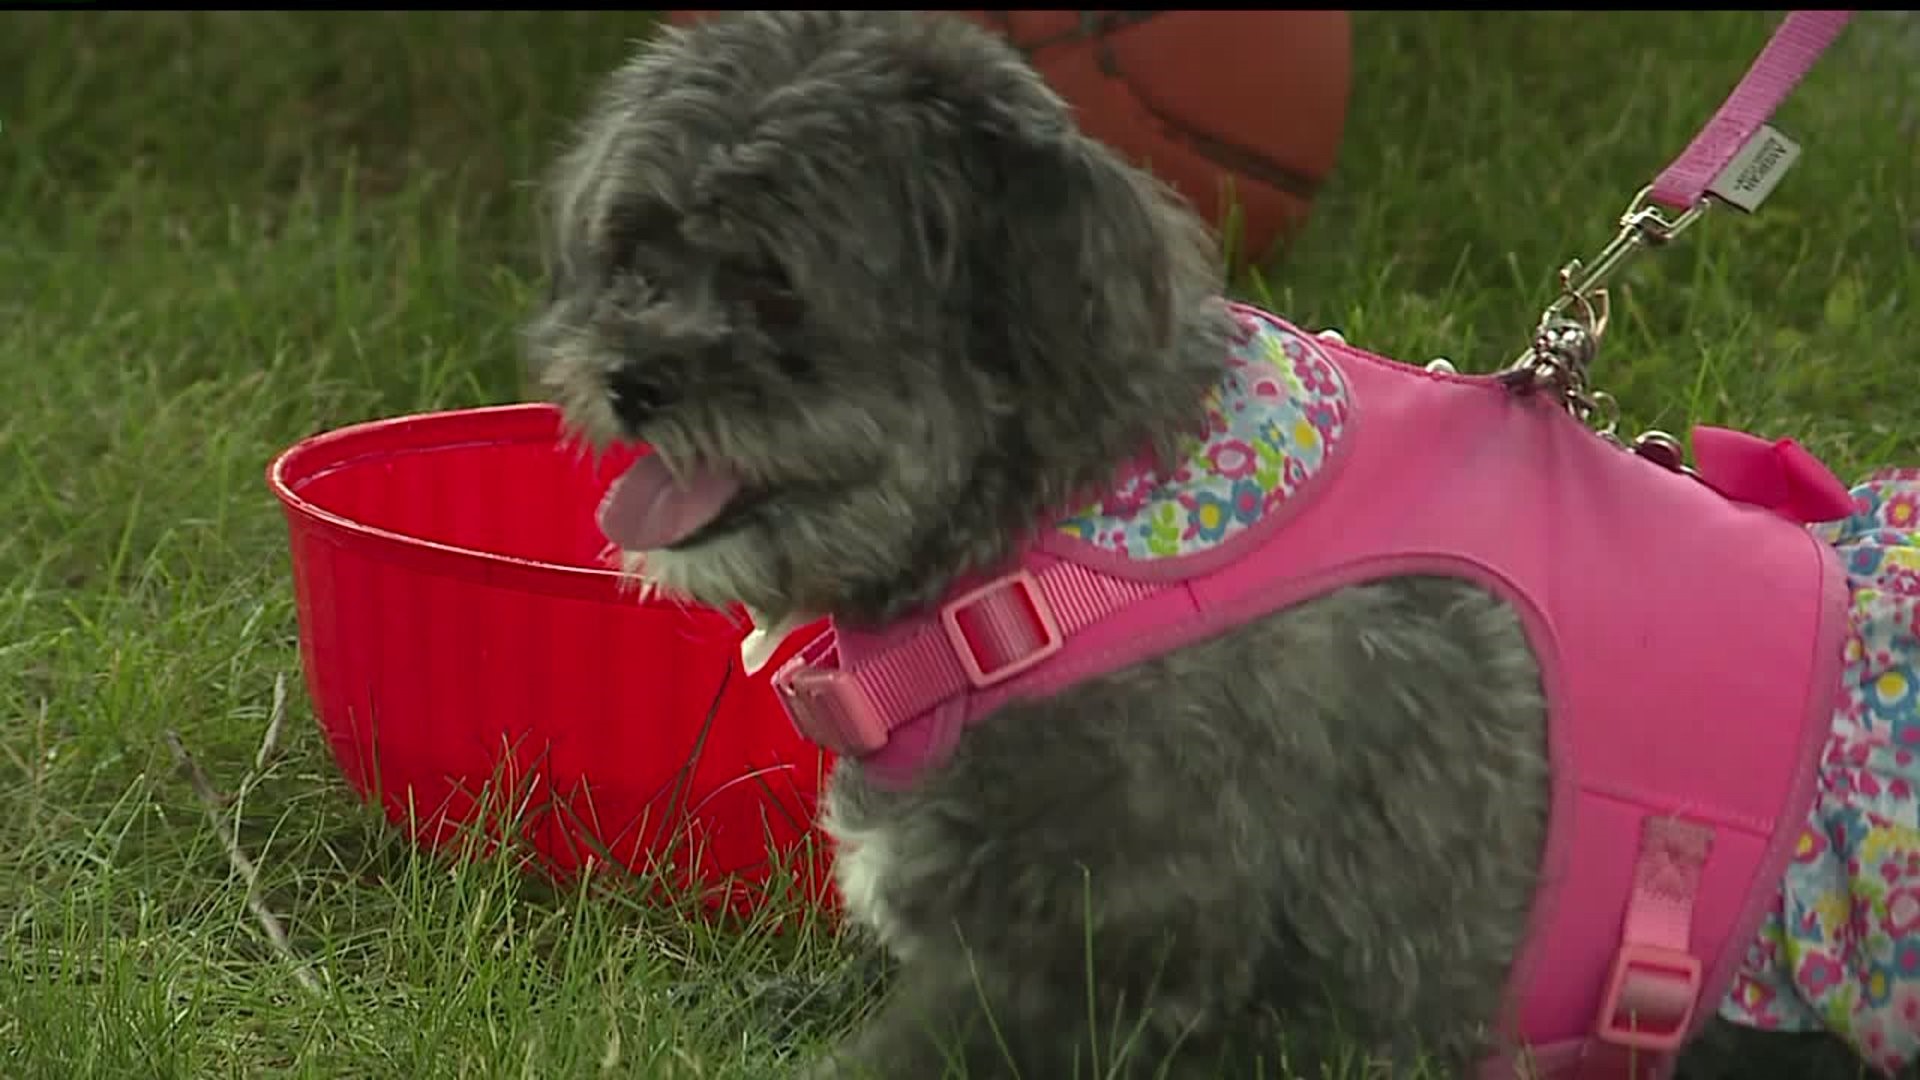 8th Annual PetAPalooza aims to match pets with forever families